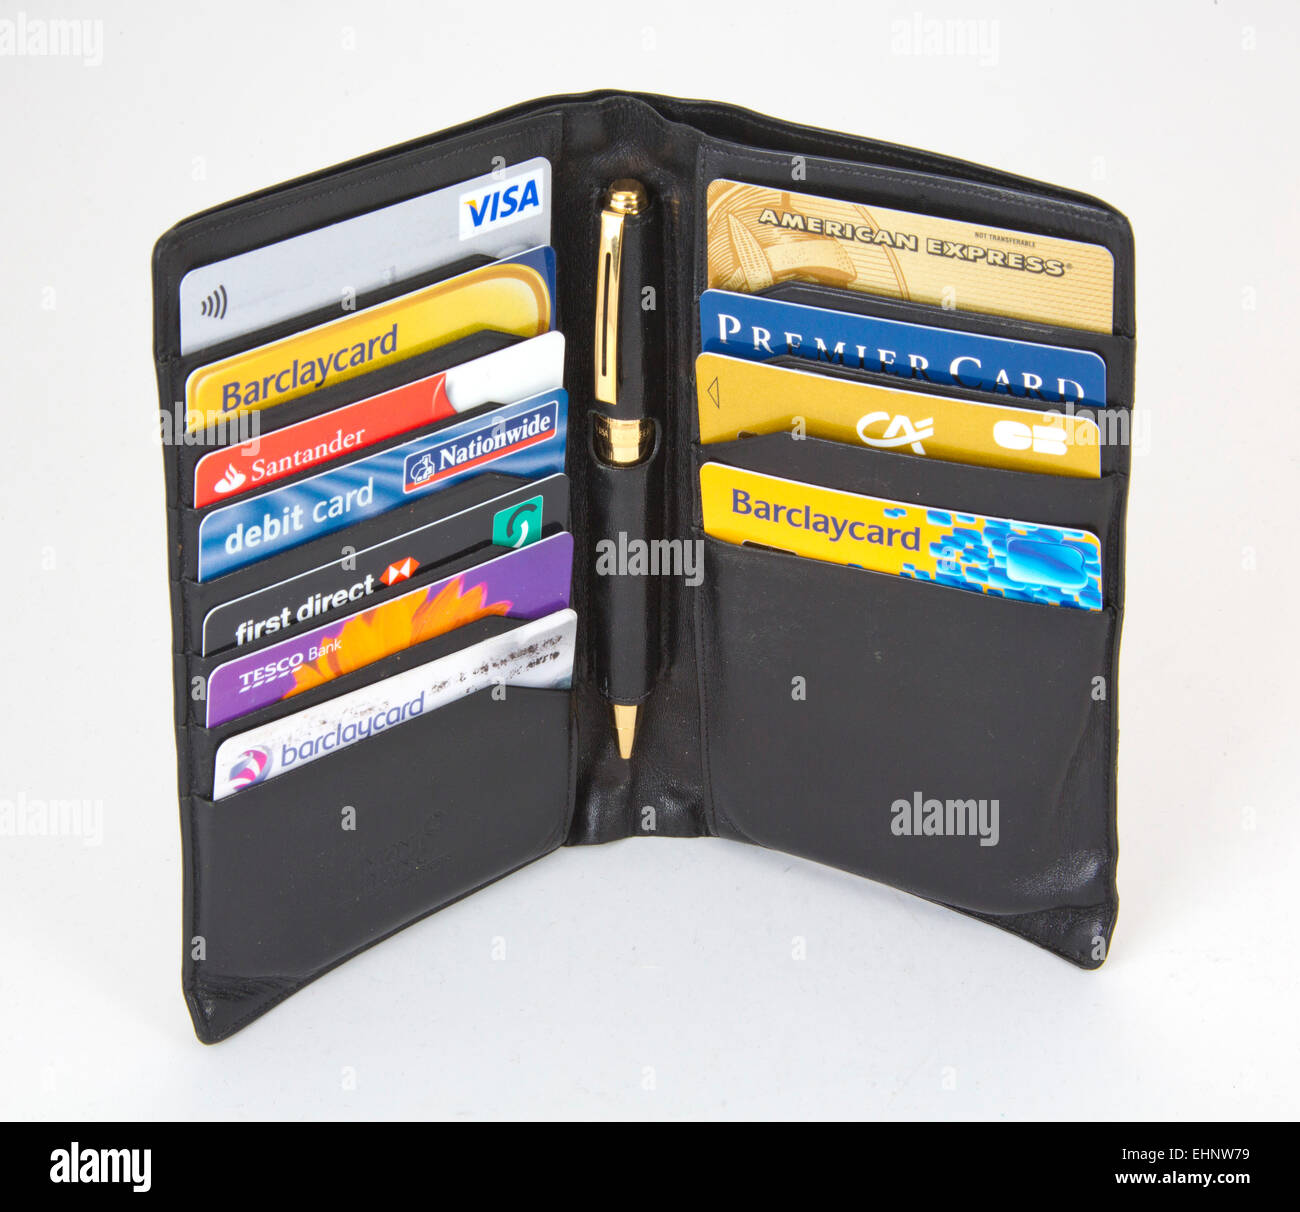 Black wallet with Assortment of credit cards Visa and American express 151148 Credit Cards Stock Photo